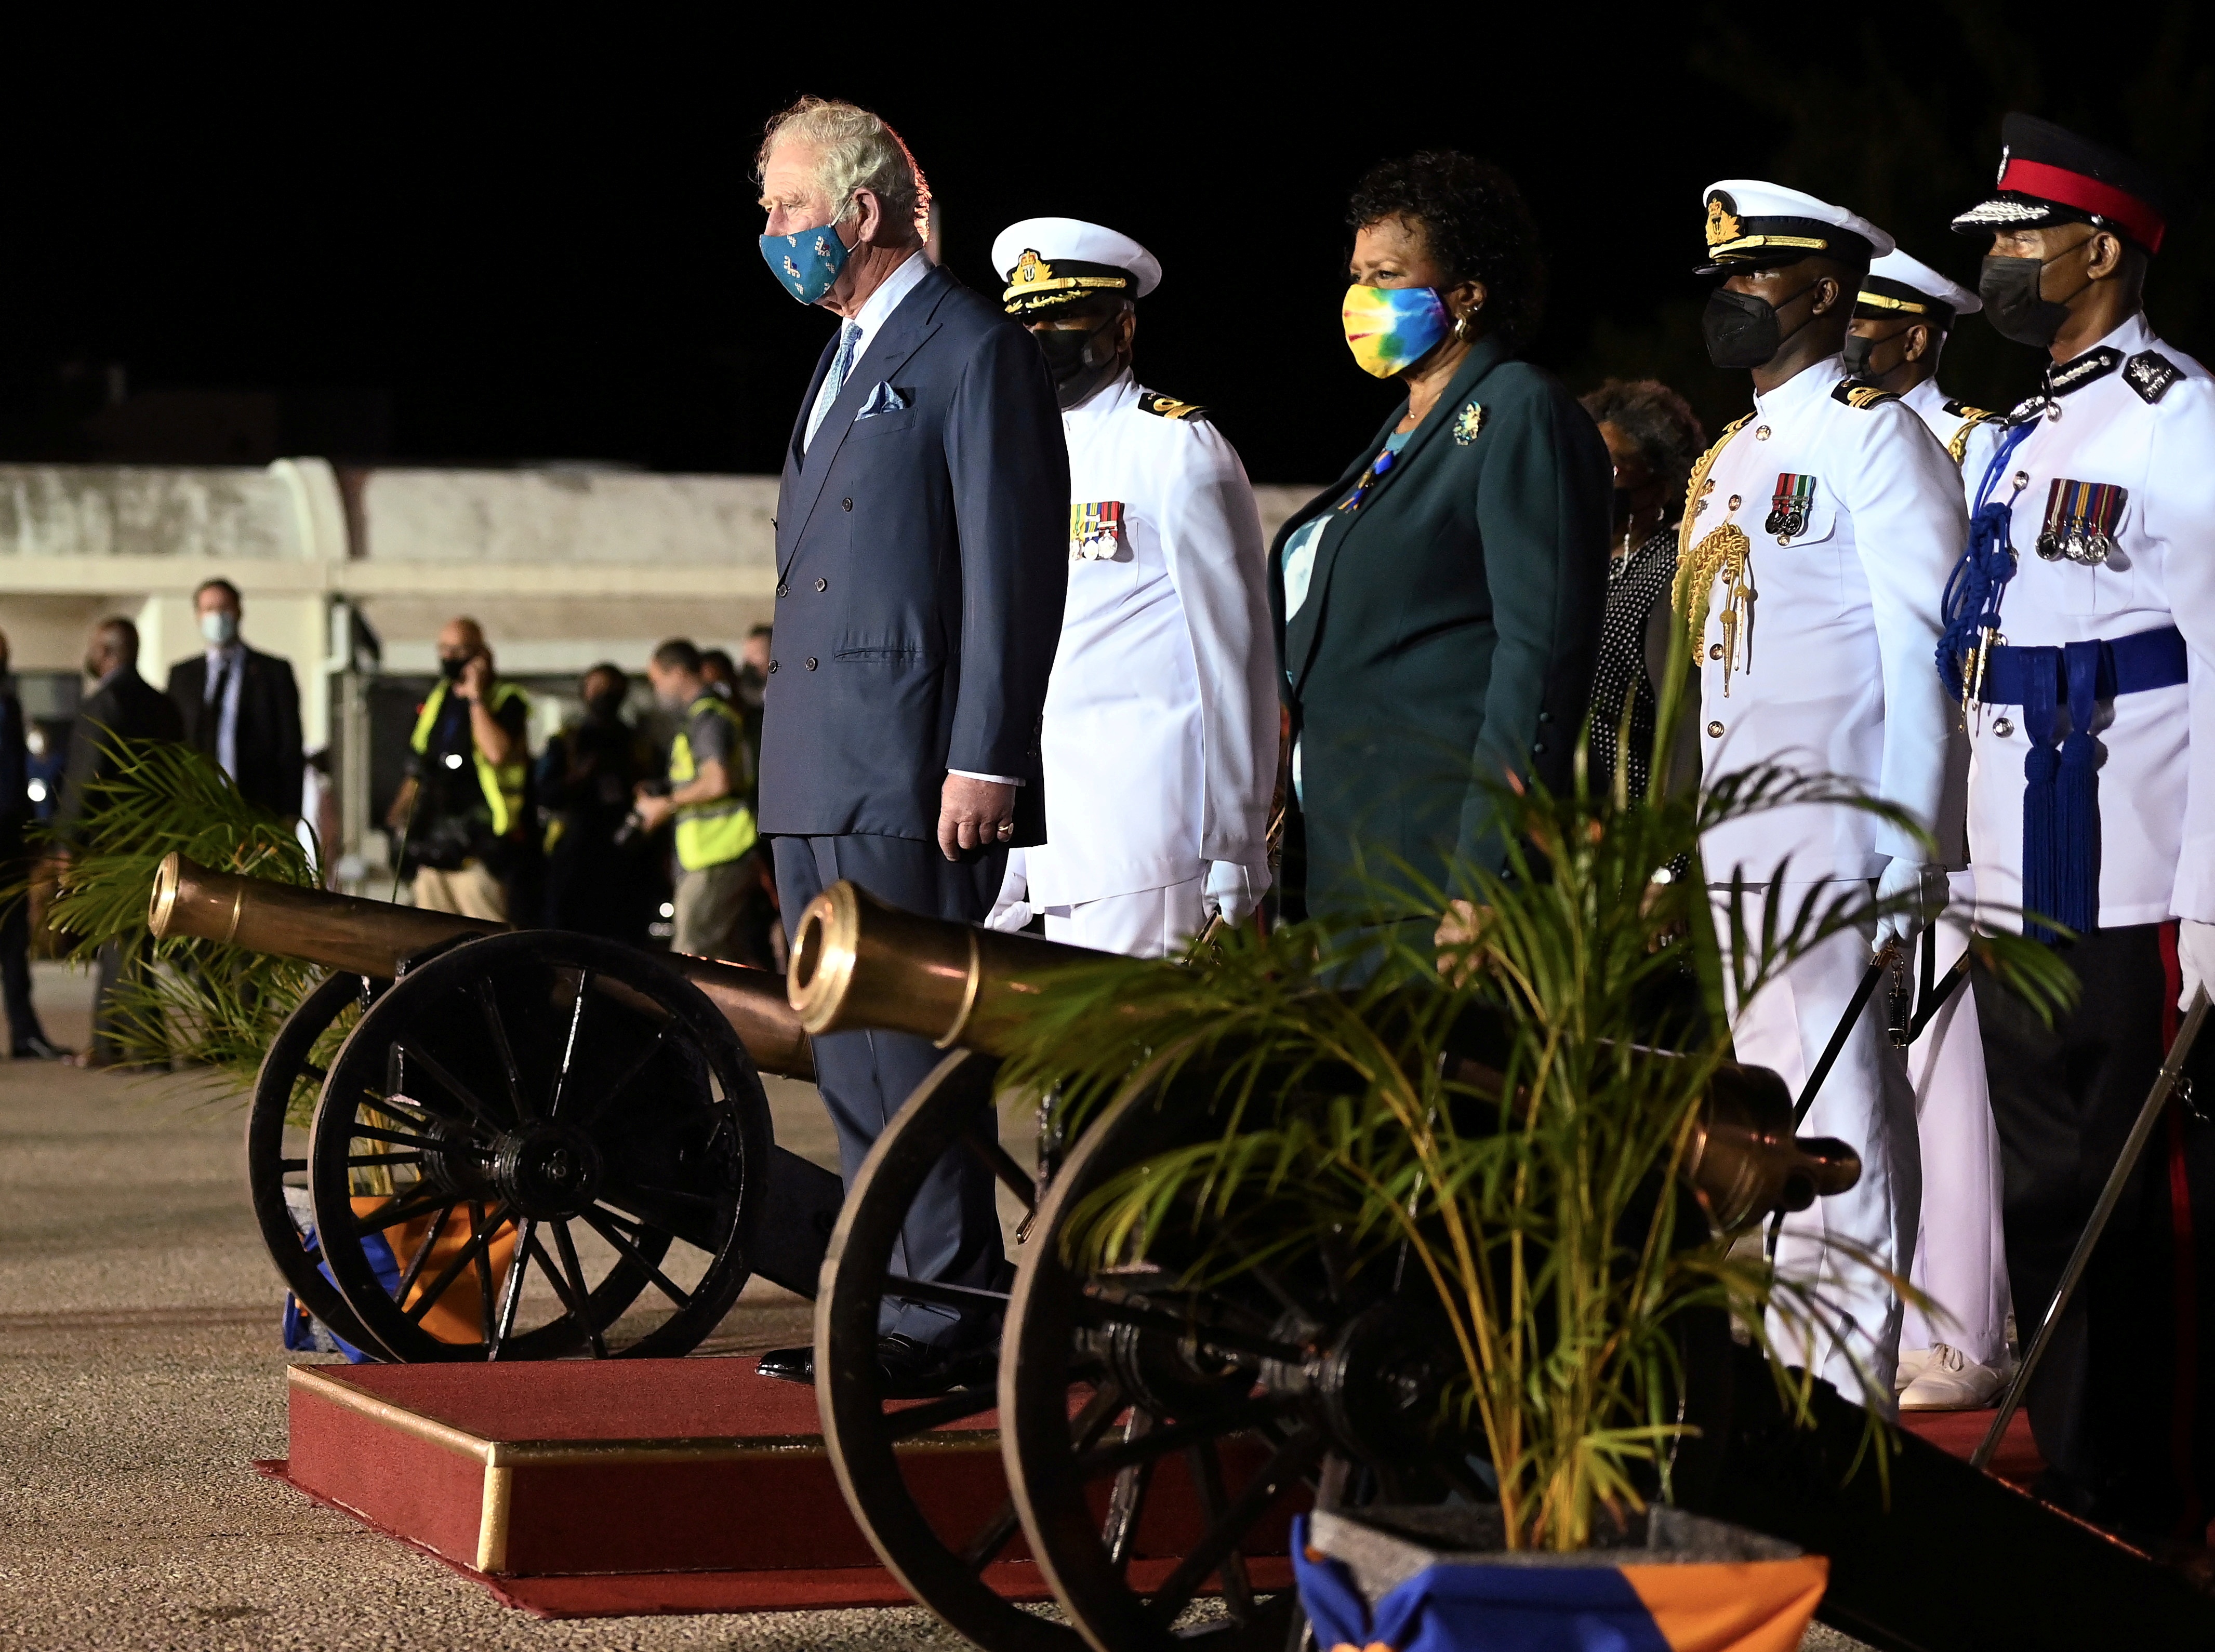 Britain's Prince Charles stands with Barbados' President-elect Sandra Mason during a Guard of Honour and playing of national anthems, as he arrives at Grantley Adams Airport, to take park in events to mark the Caribbean island's transition to a birth of a new republic, Bridgetown, Barbados, November 28, 2021. / REUTERS/Toby Melville